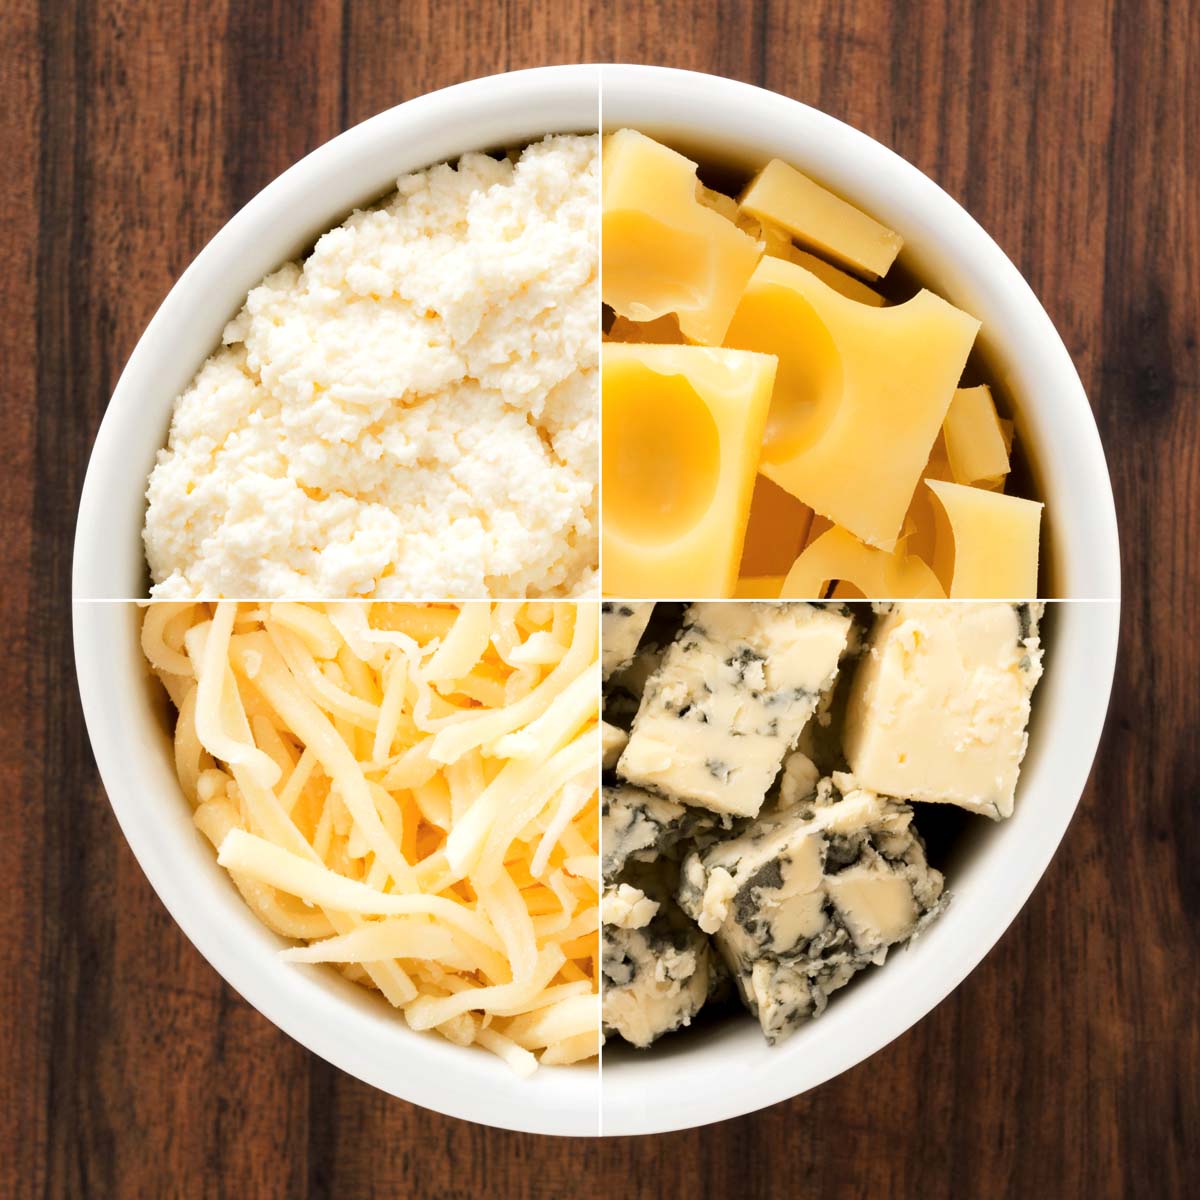 Making Cheese at Home: 5-Minute Cheese Spread